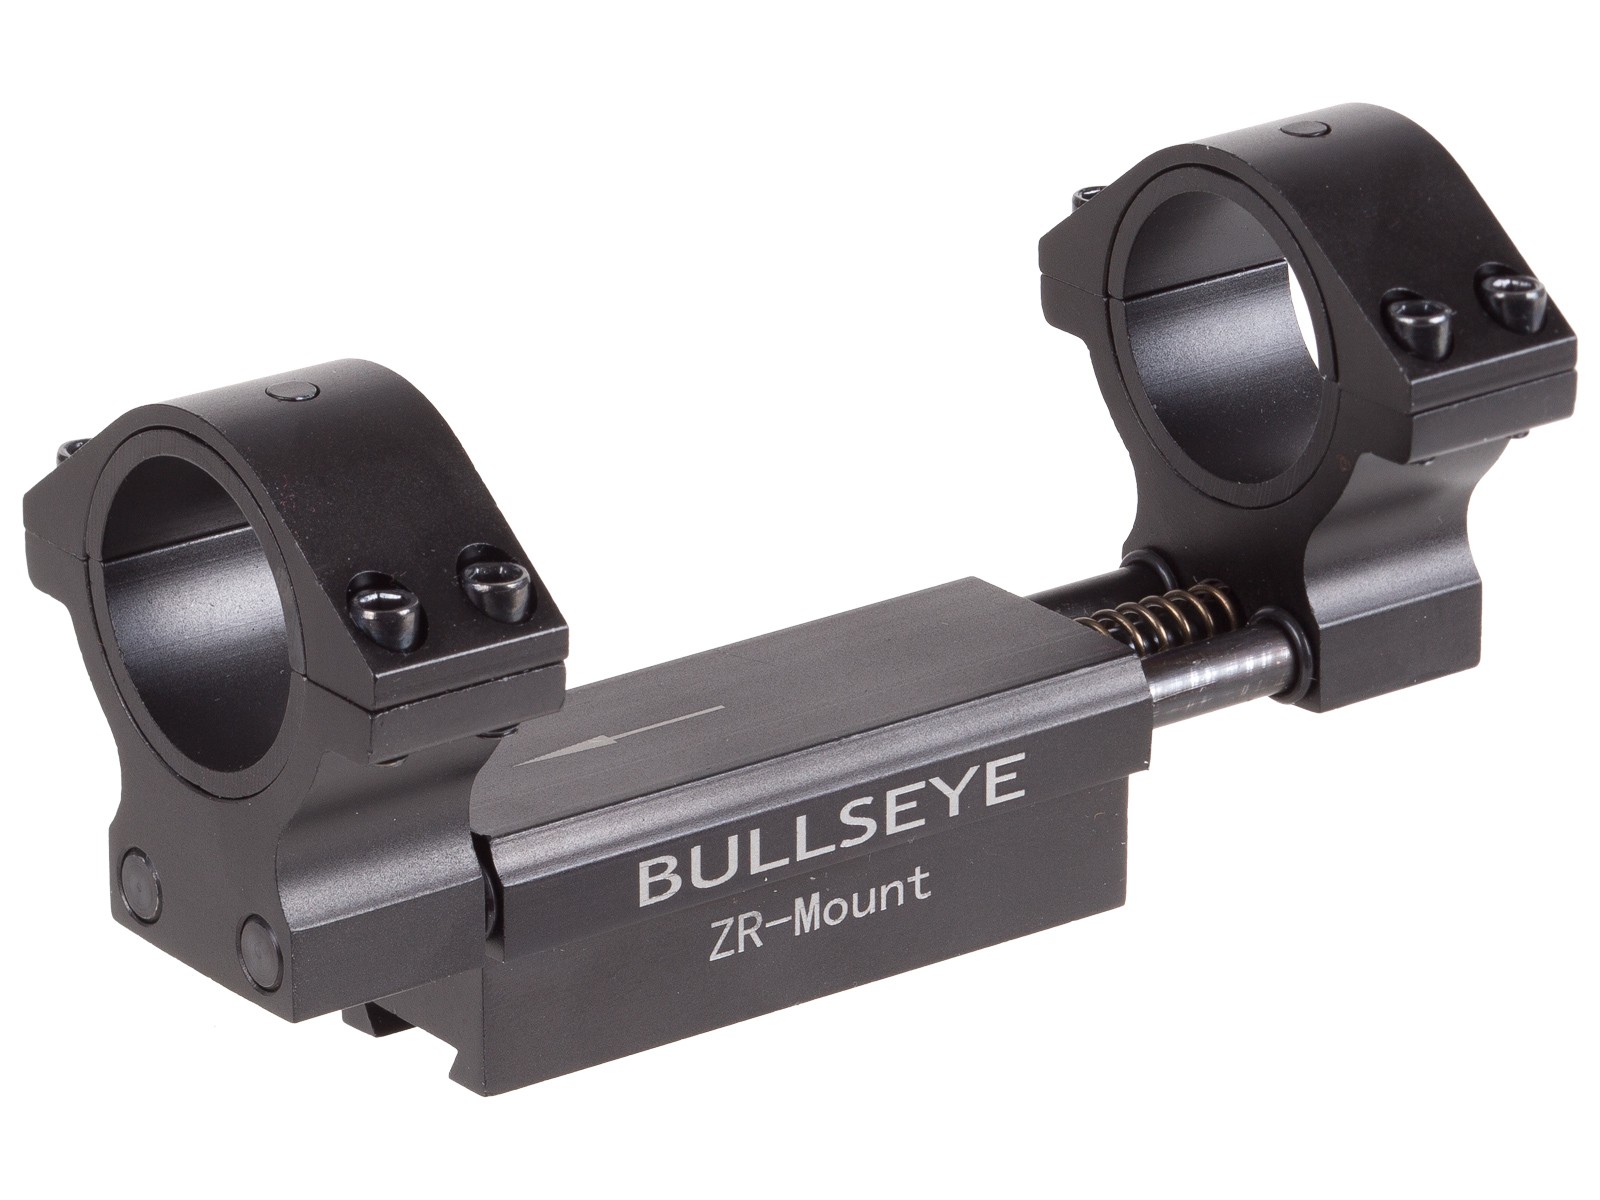 Bullseye ZR 1-Pc Mount, Fits 1" and 30mm tubes, 11mm Dovetail, 0.04" Droop Compensation, Recoil Compensation